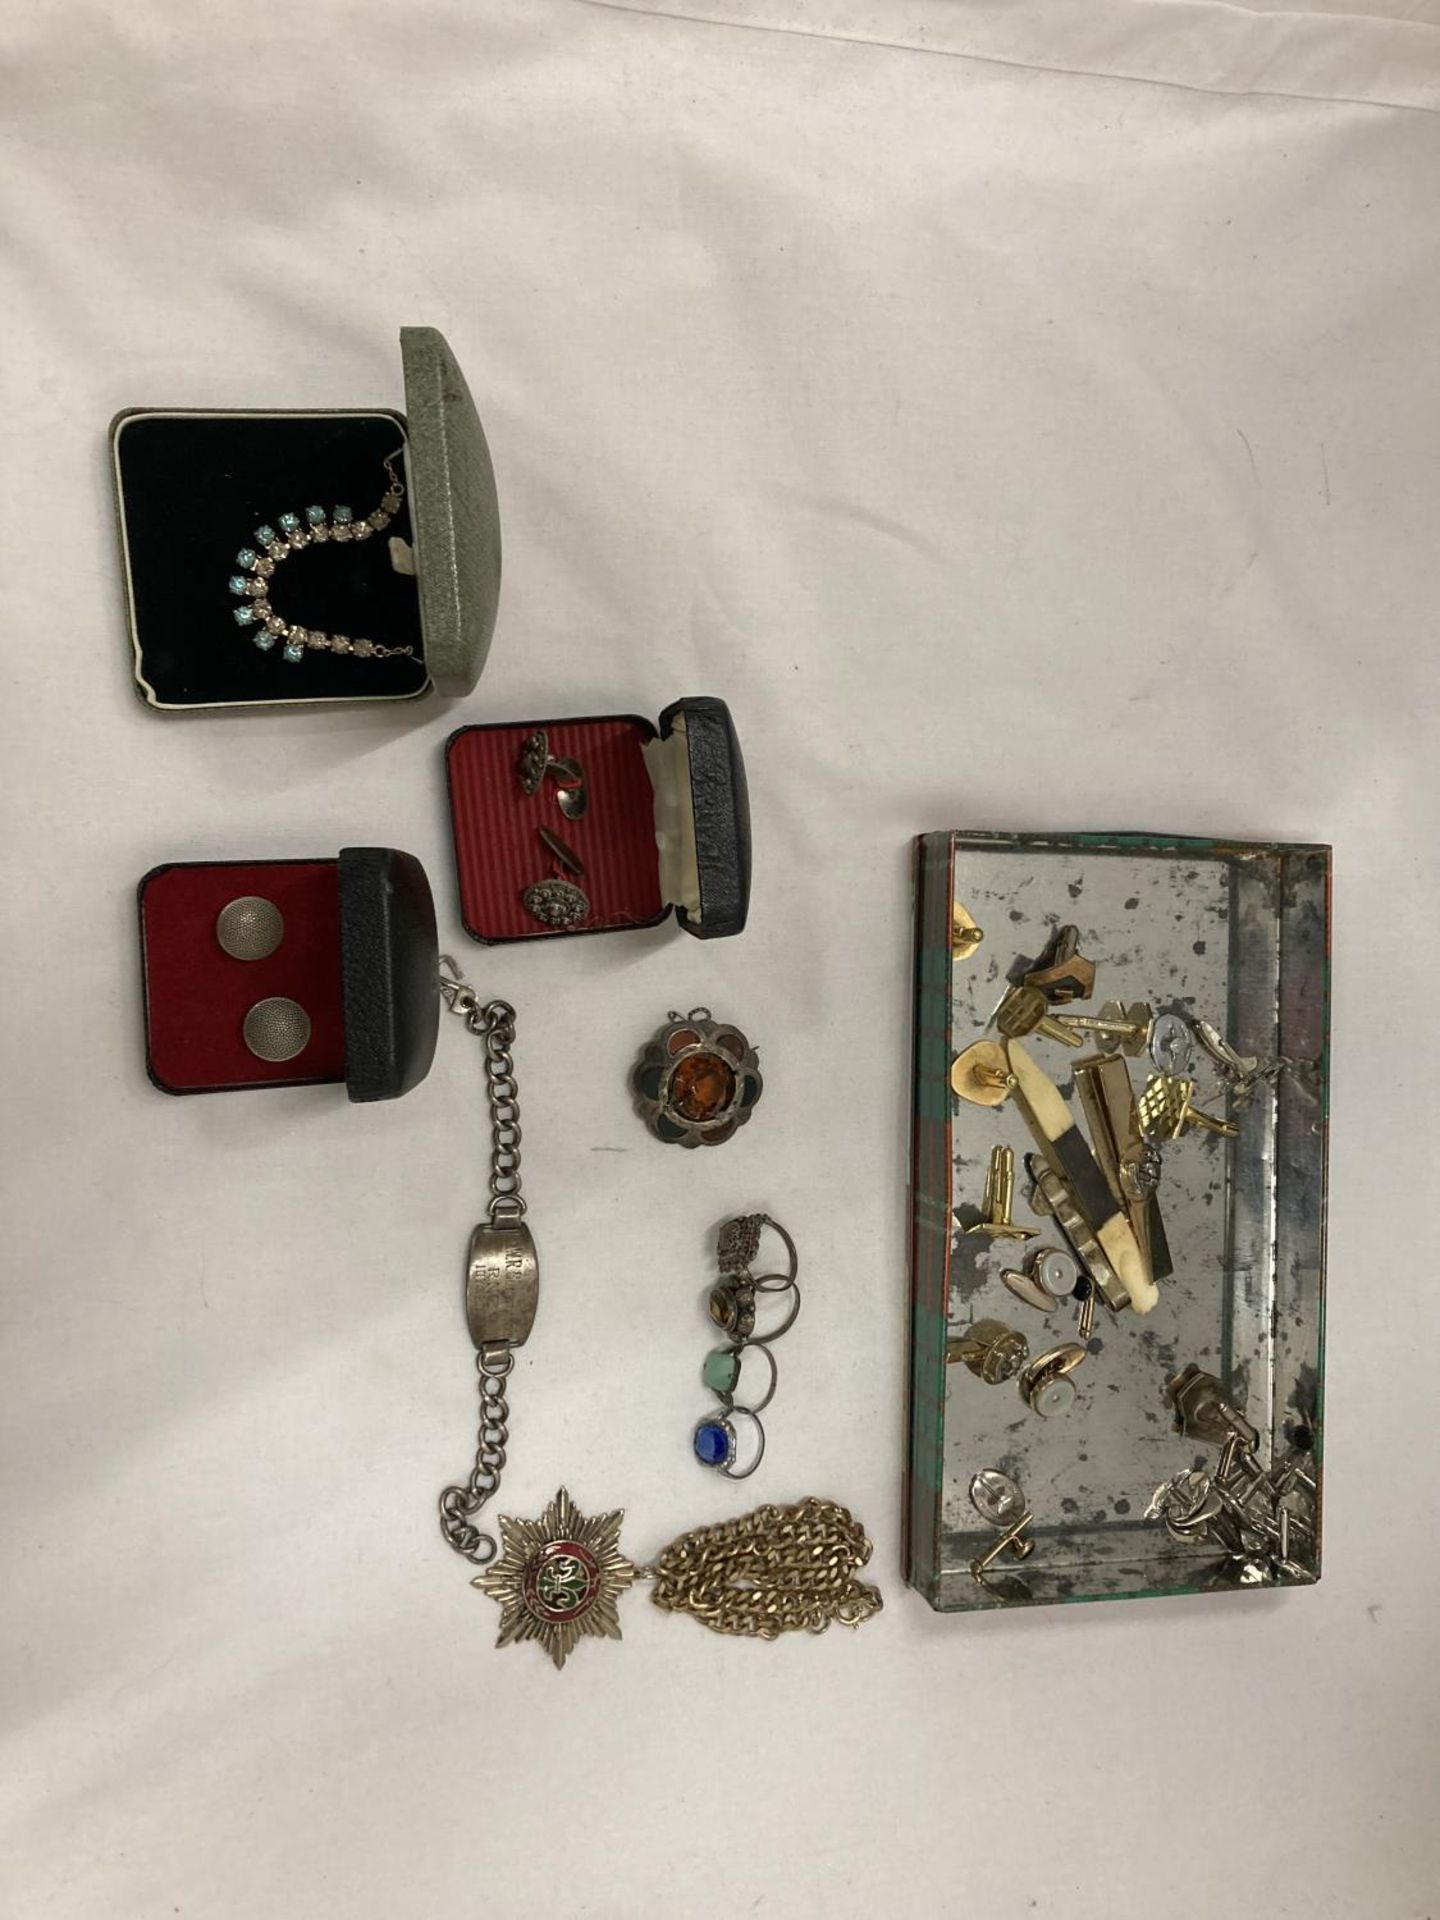 A QUANTITY OF VINTAGE COSTUME JEWELLERY TO INCLUDE A BROOCH, RINGS, CUFFLINKS, NECKLACE, ETC